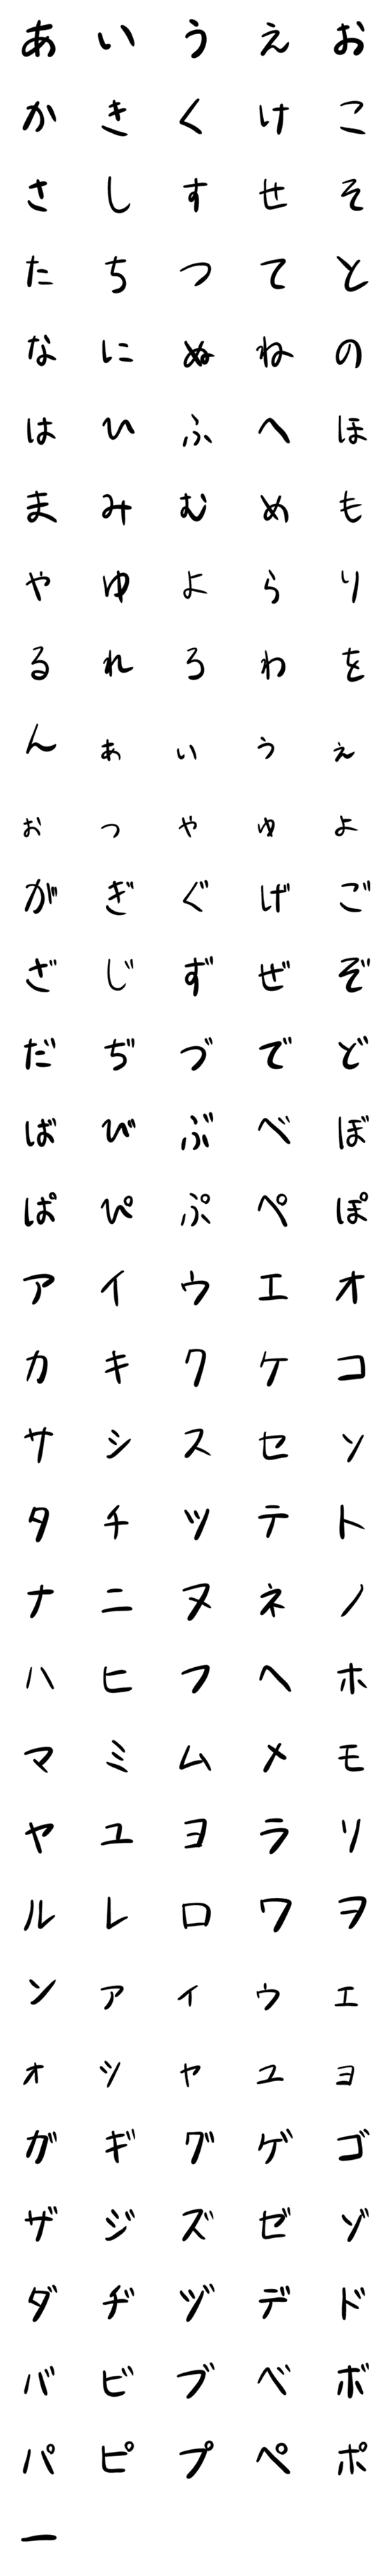 [LINE絵文字]ぼくが書いた文字の画像一覧